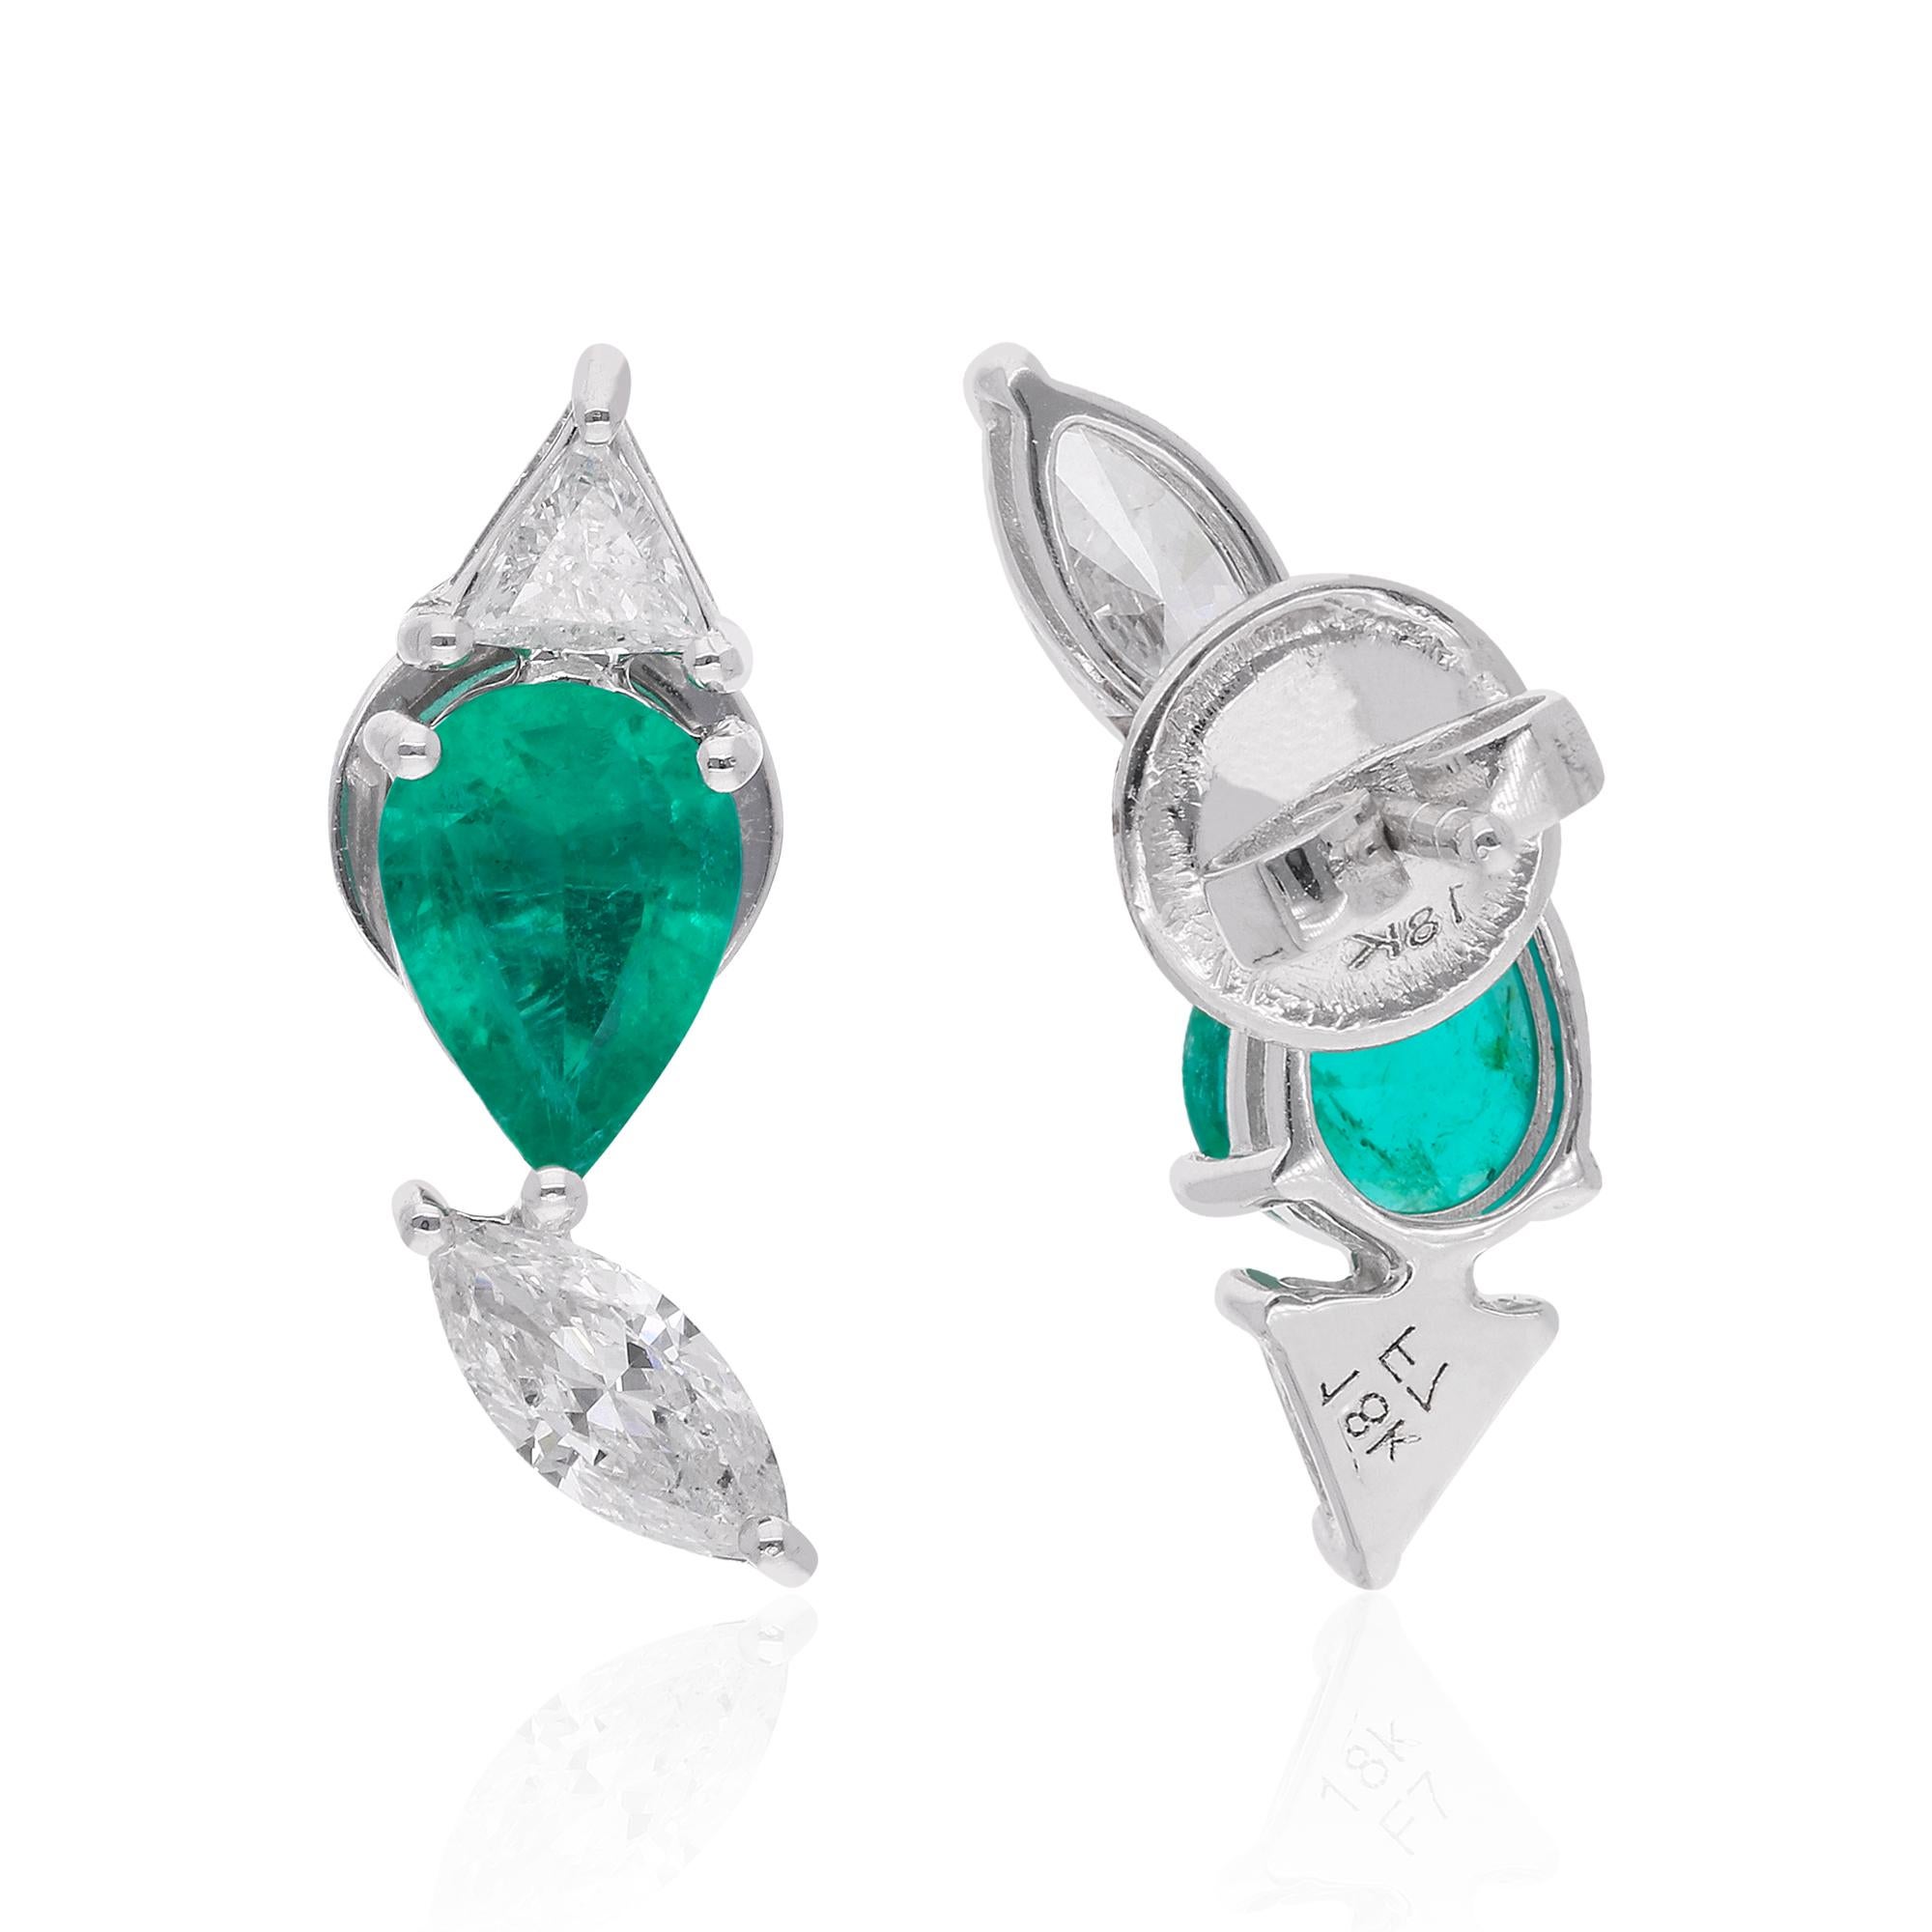 The pear-shaped Zambian emeralds are known for their rich green color and elegance. They are prized for their vibrant hue and natural beauty. The trillion-shaped diamonds add a geometric and modern touch, while the marquise-shaped diamonds bring a